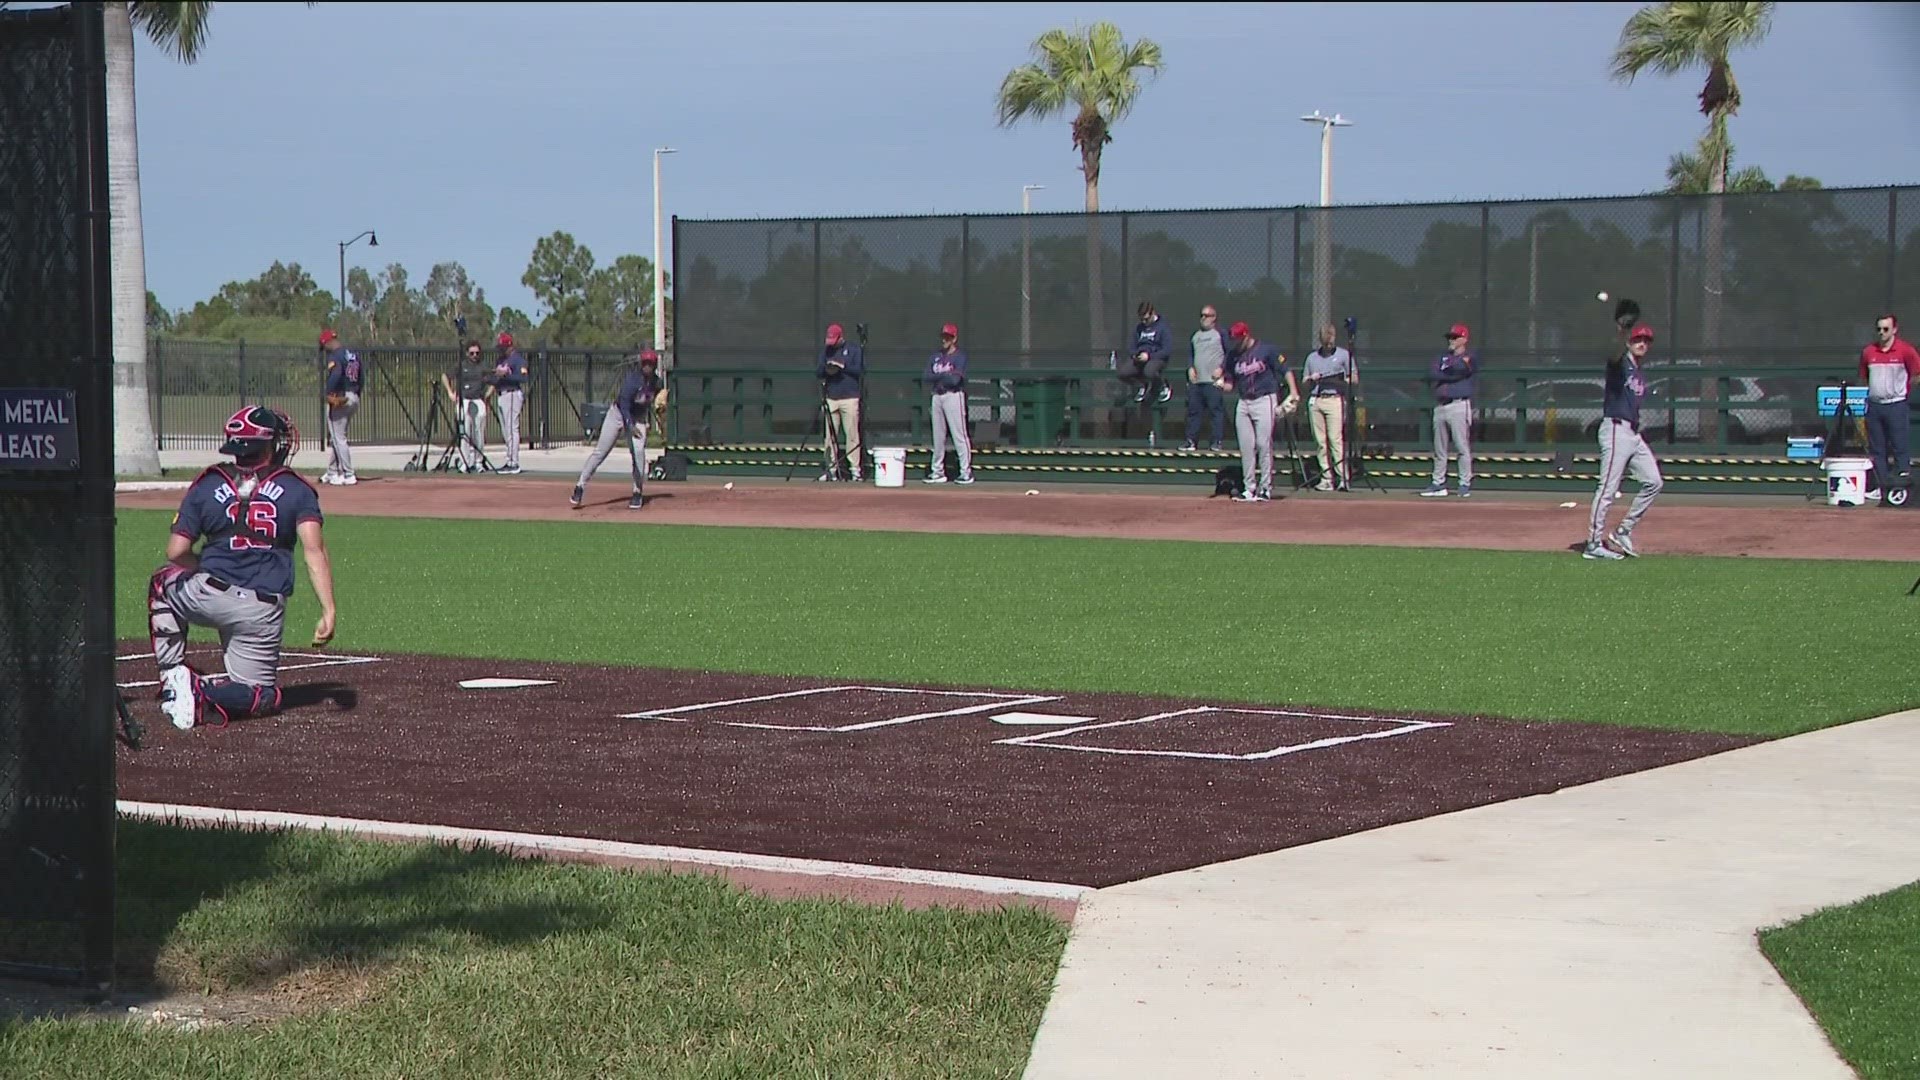 Braves take the field for first day of spring training, Full raw  highlights